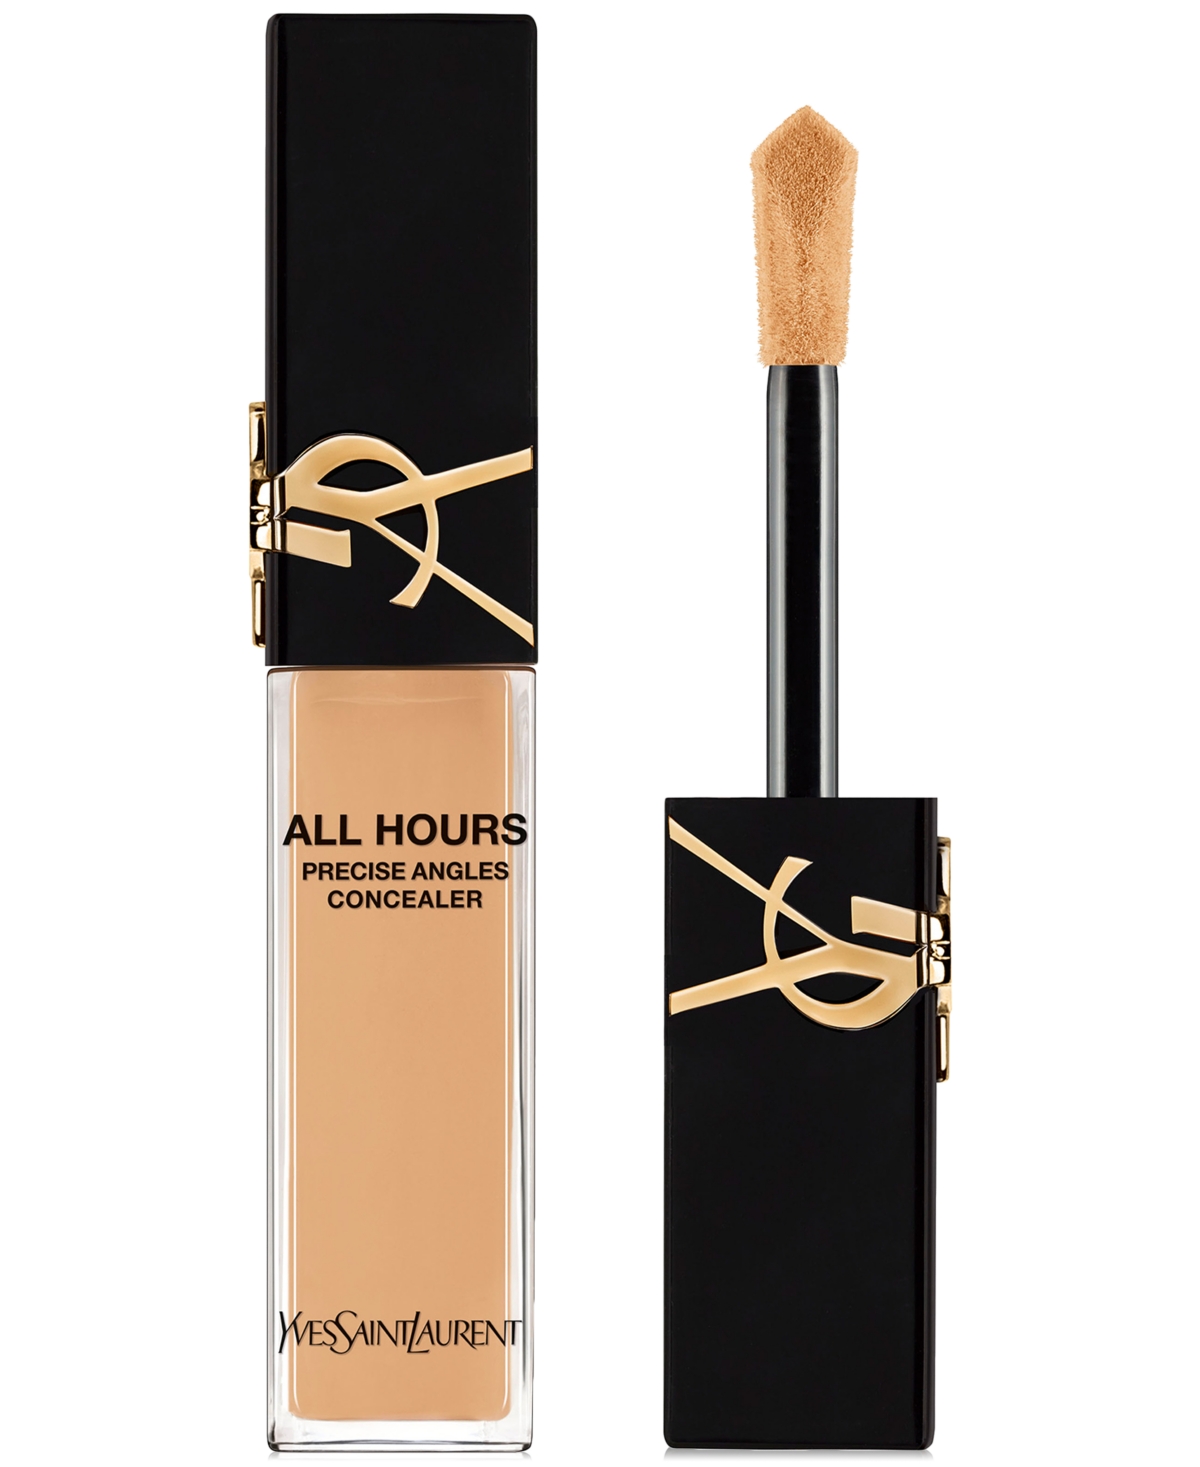 Saint Laurent All Hours Precise Angles Full-coverage Concealer In Light Shade With Warm Undertones